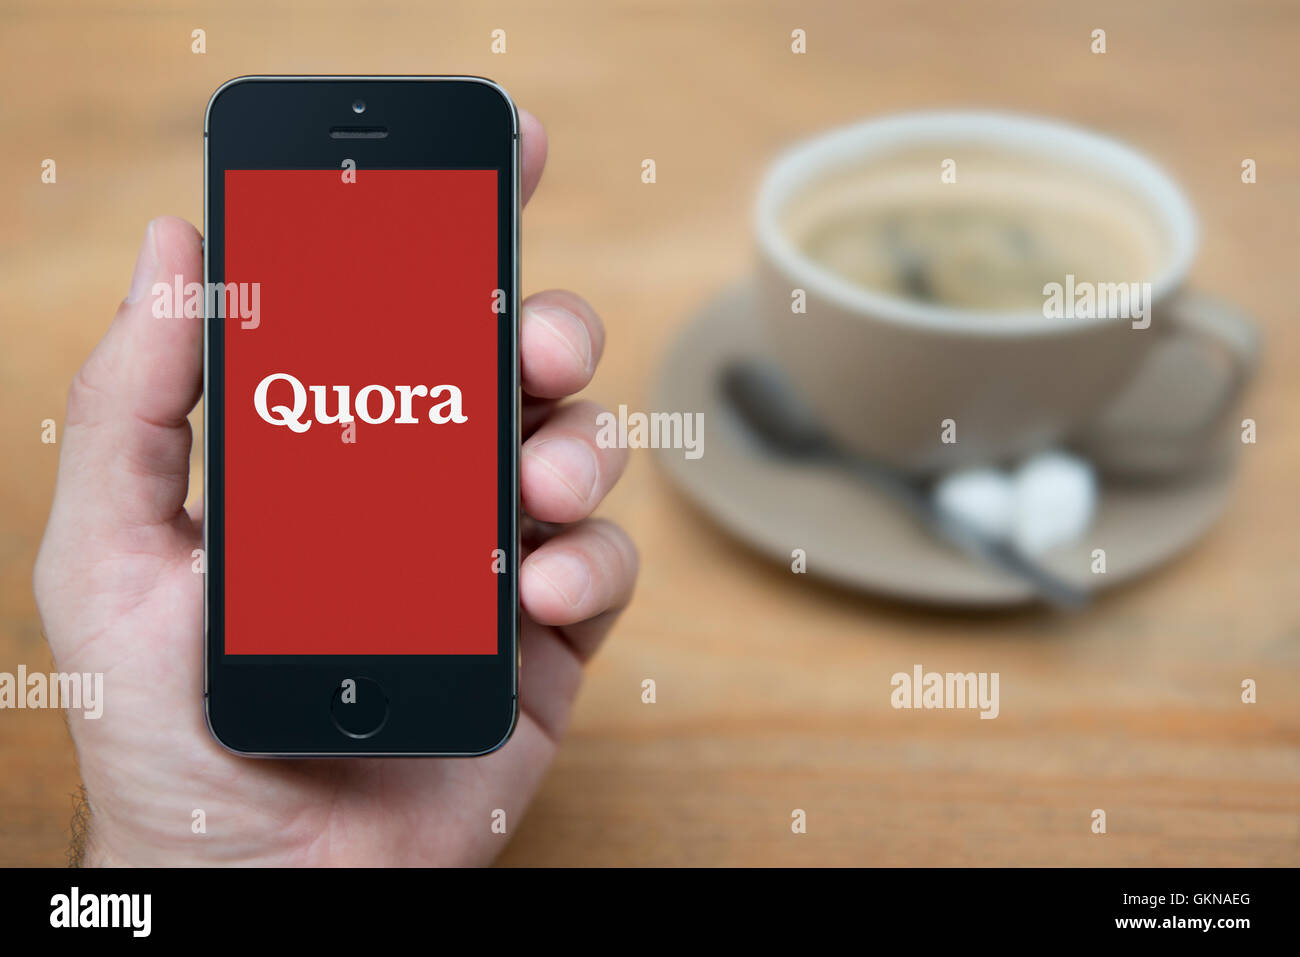 https://c8.alamy.com/comp/GKNAEG/a-man-looks-at-his-iphone-which-displays-the-quora-logo-while-sat-GKNAEG.jpg